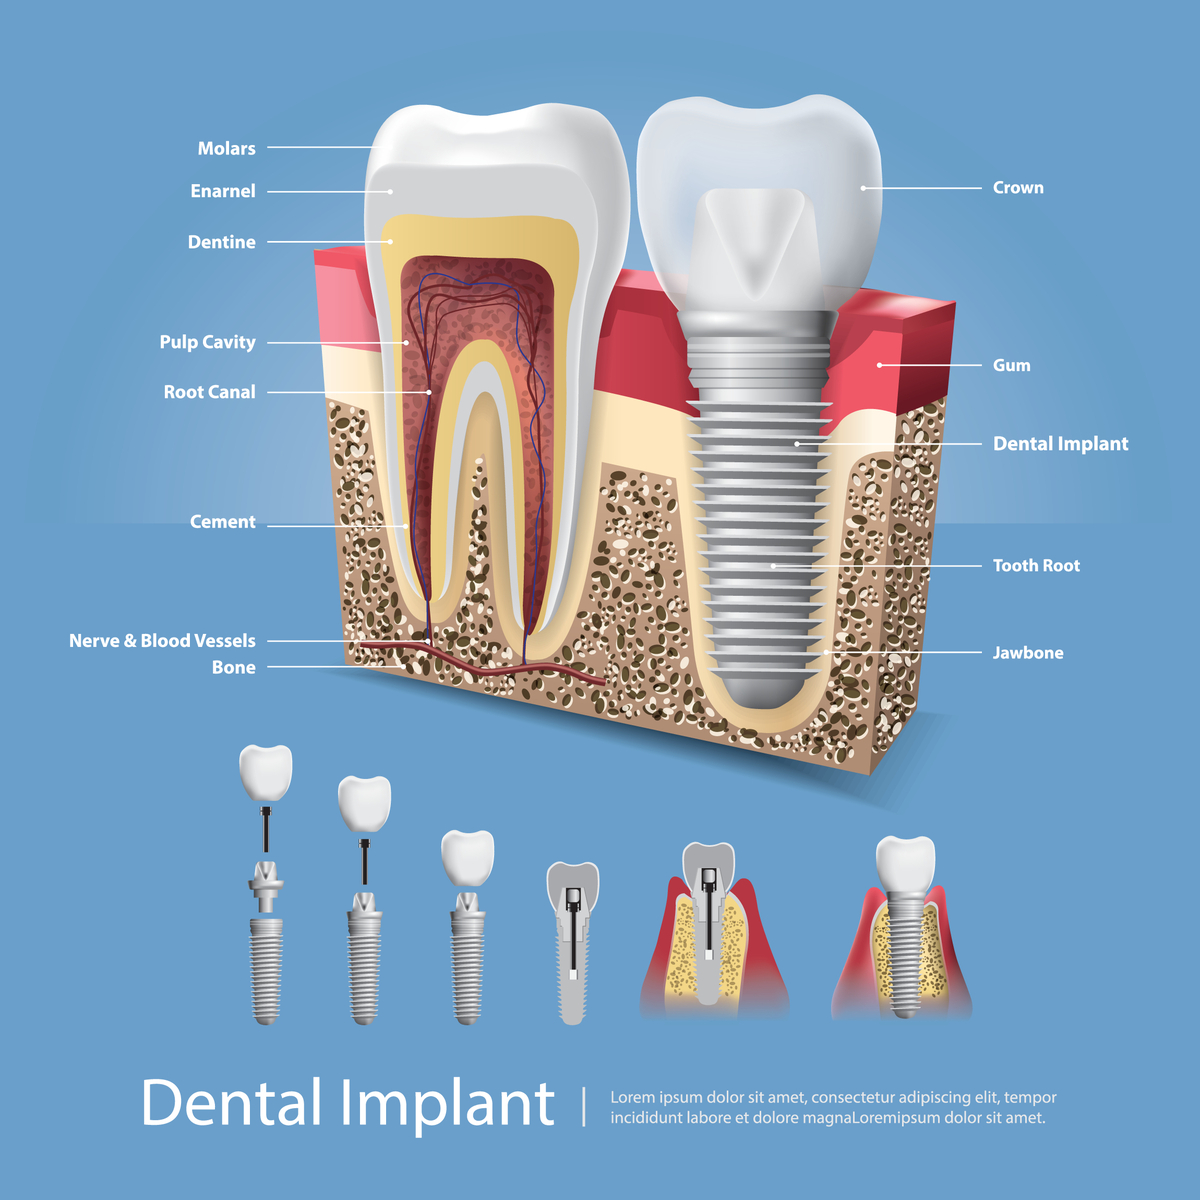 Dental Implant Jennings, MO | Tooth Pain | Restorative Dentistry | Cosmetic Dentistry Near Jennings, MO